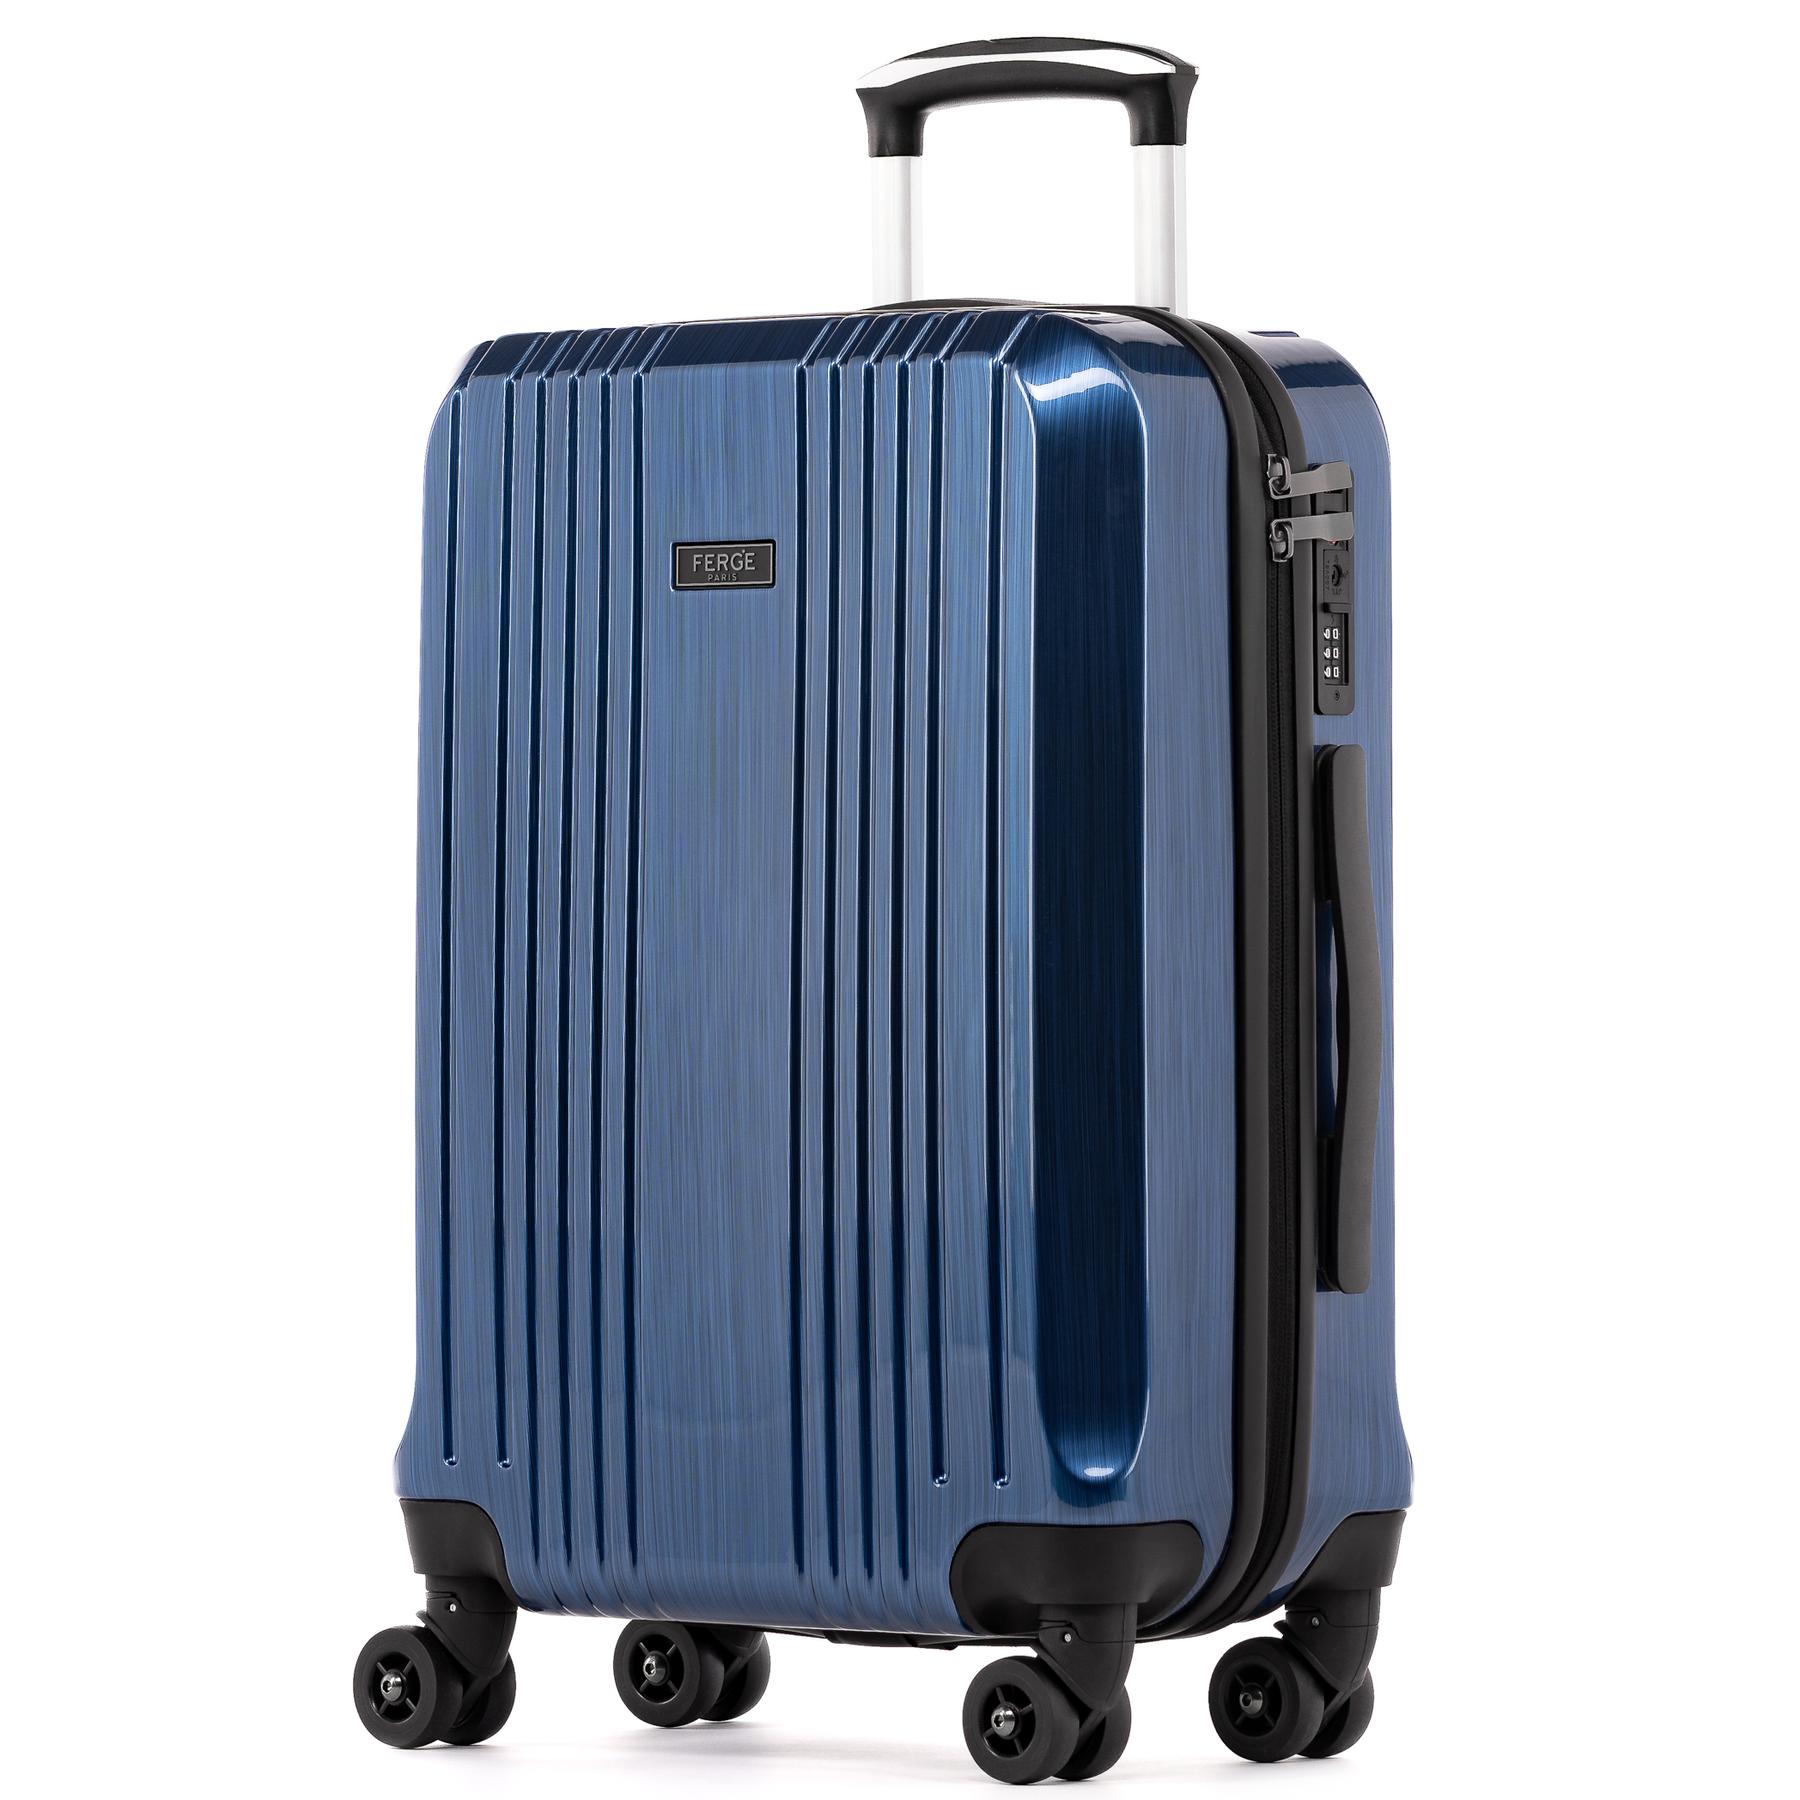 Hand luggage suitcase CANNES ABS & PC